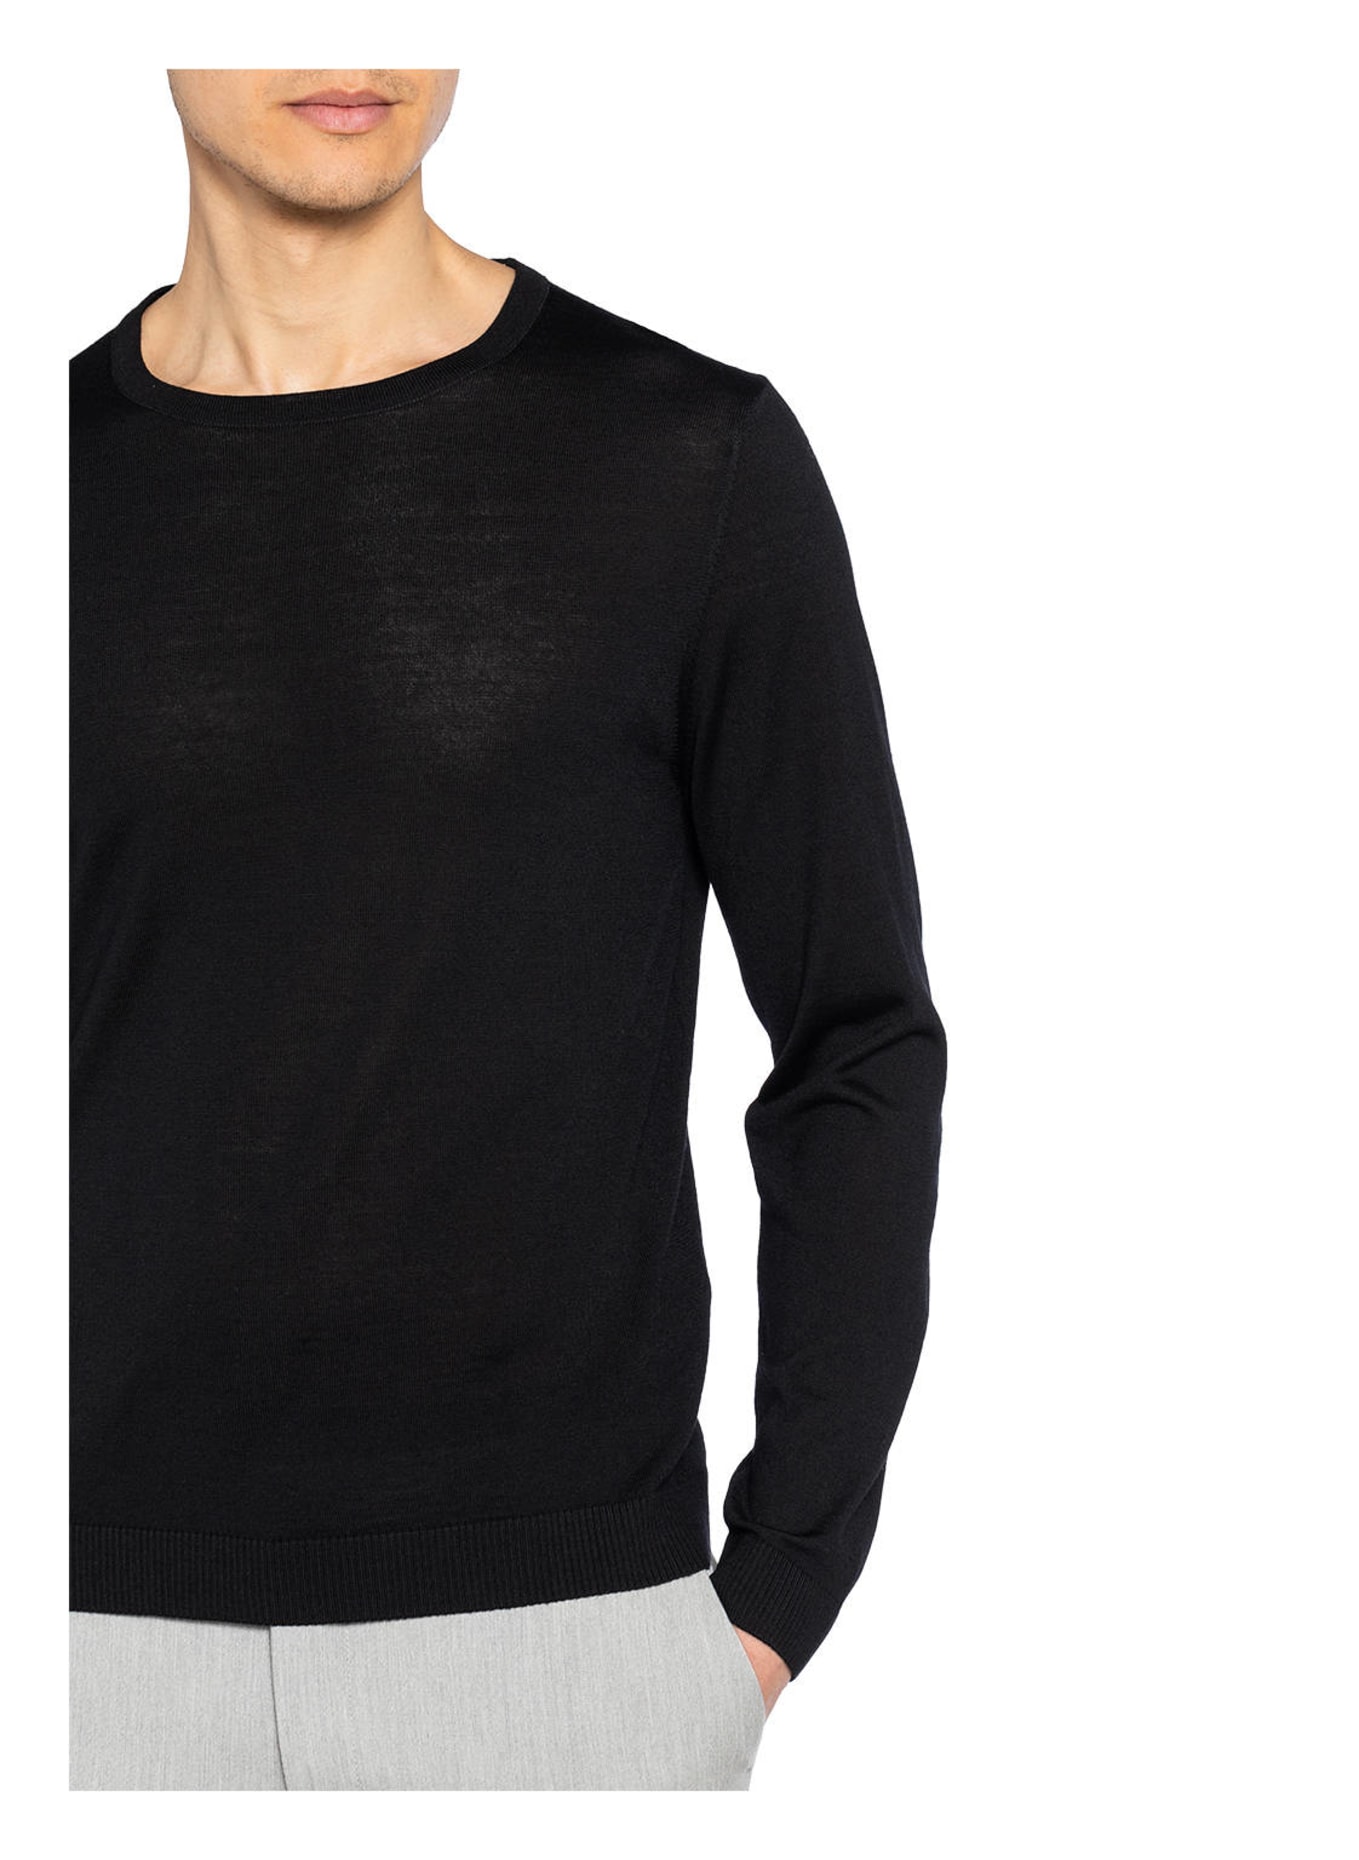 MAERZ MUENCHEN Sweater made of merino wool, Color: BLACK (Image 4)